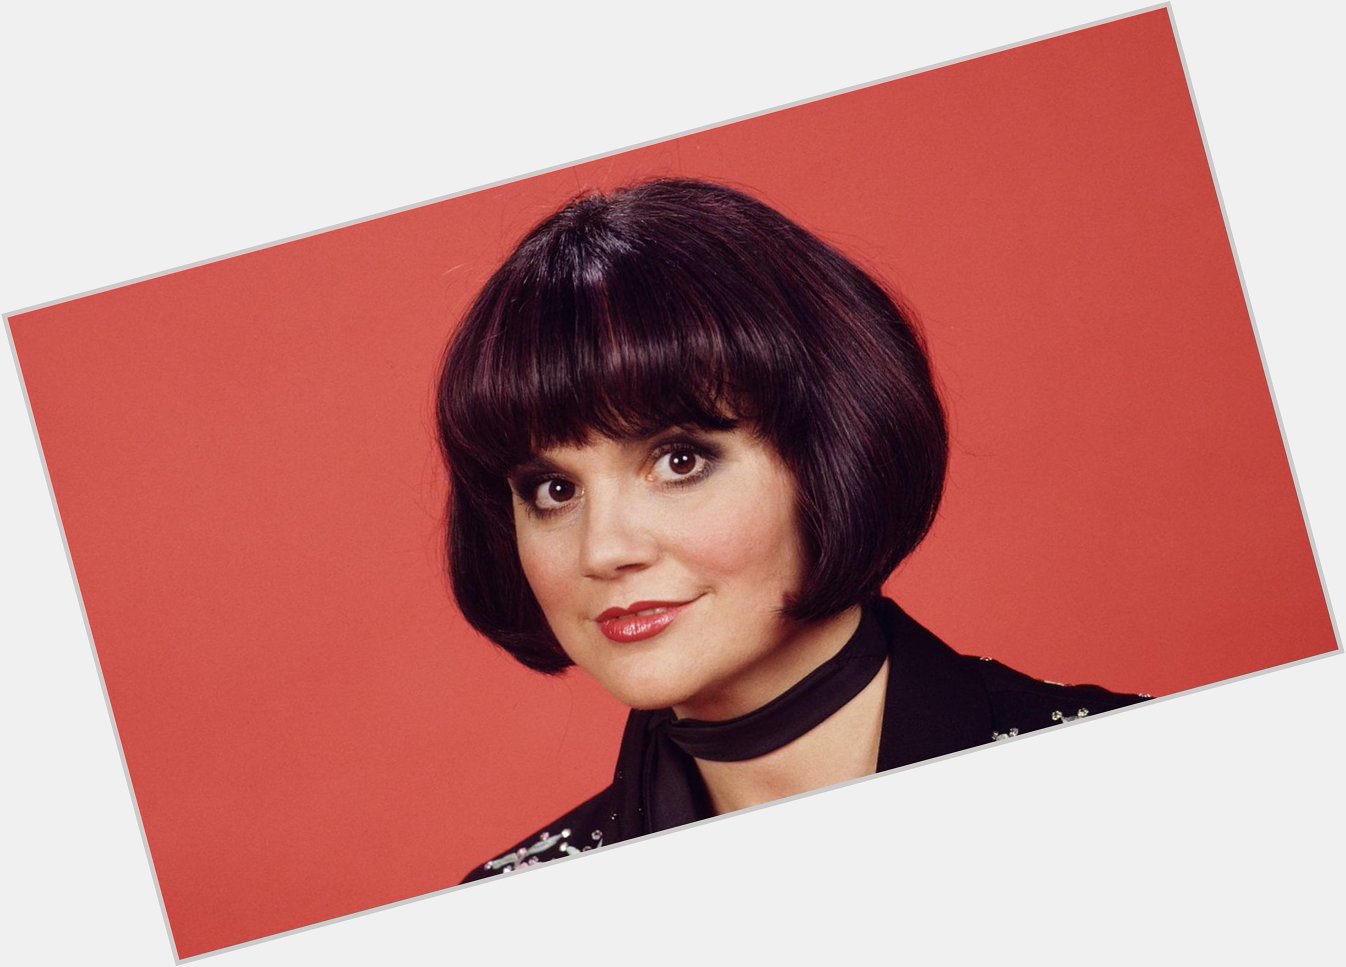 Happy Birthday to Linda Ronstadt! 
What are your favorite songs by Linda?  